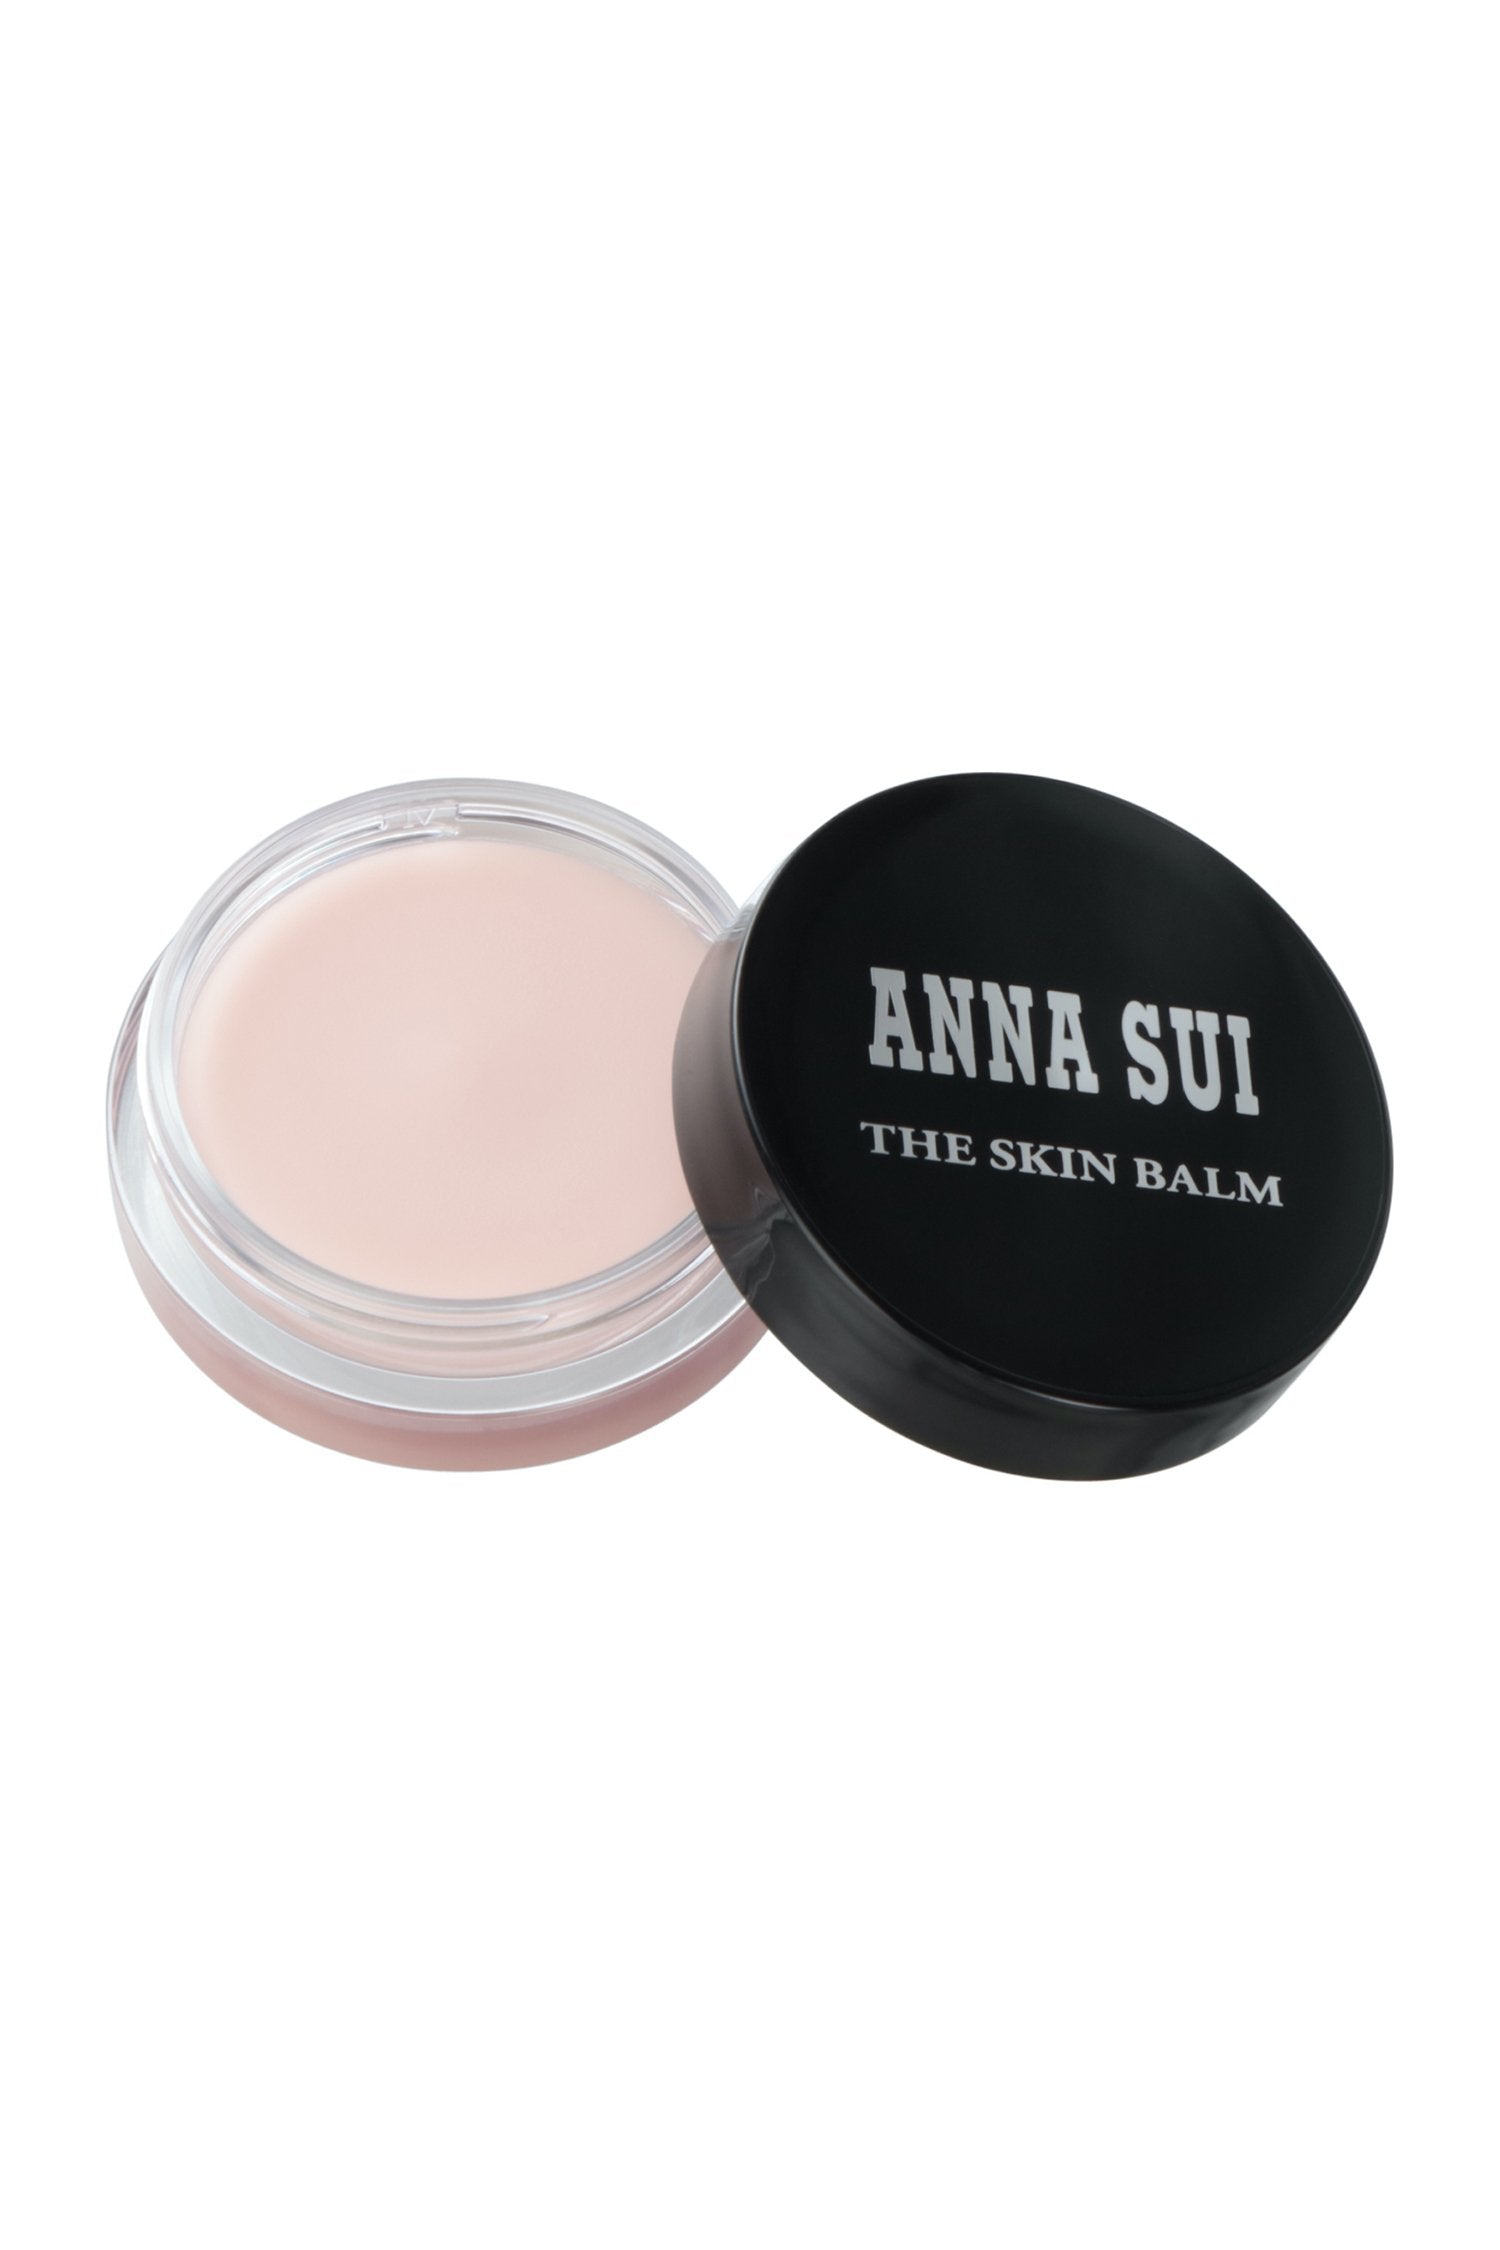 The skin balm is in a round container with a black cover featuring the Anna Sui and skin balm label.